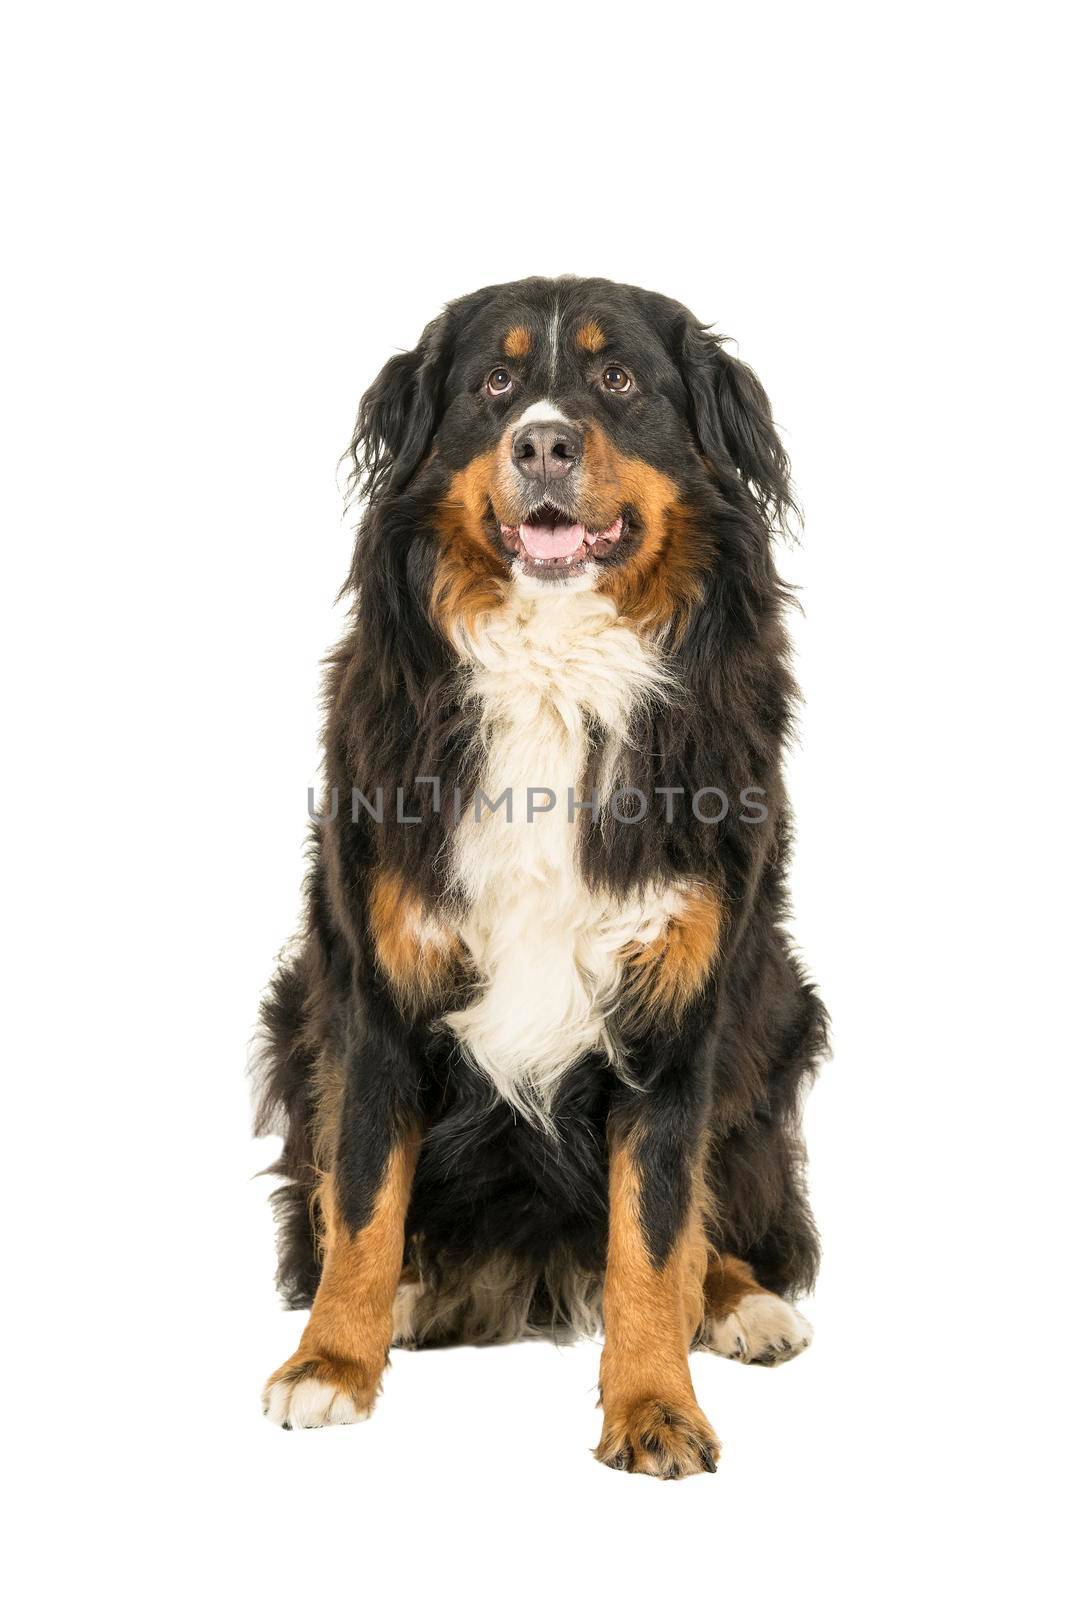 A Berner Sennen Mountain dog sitting looking up isolated on a white background